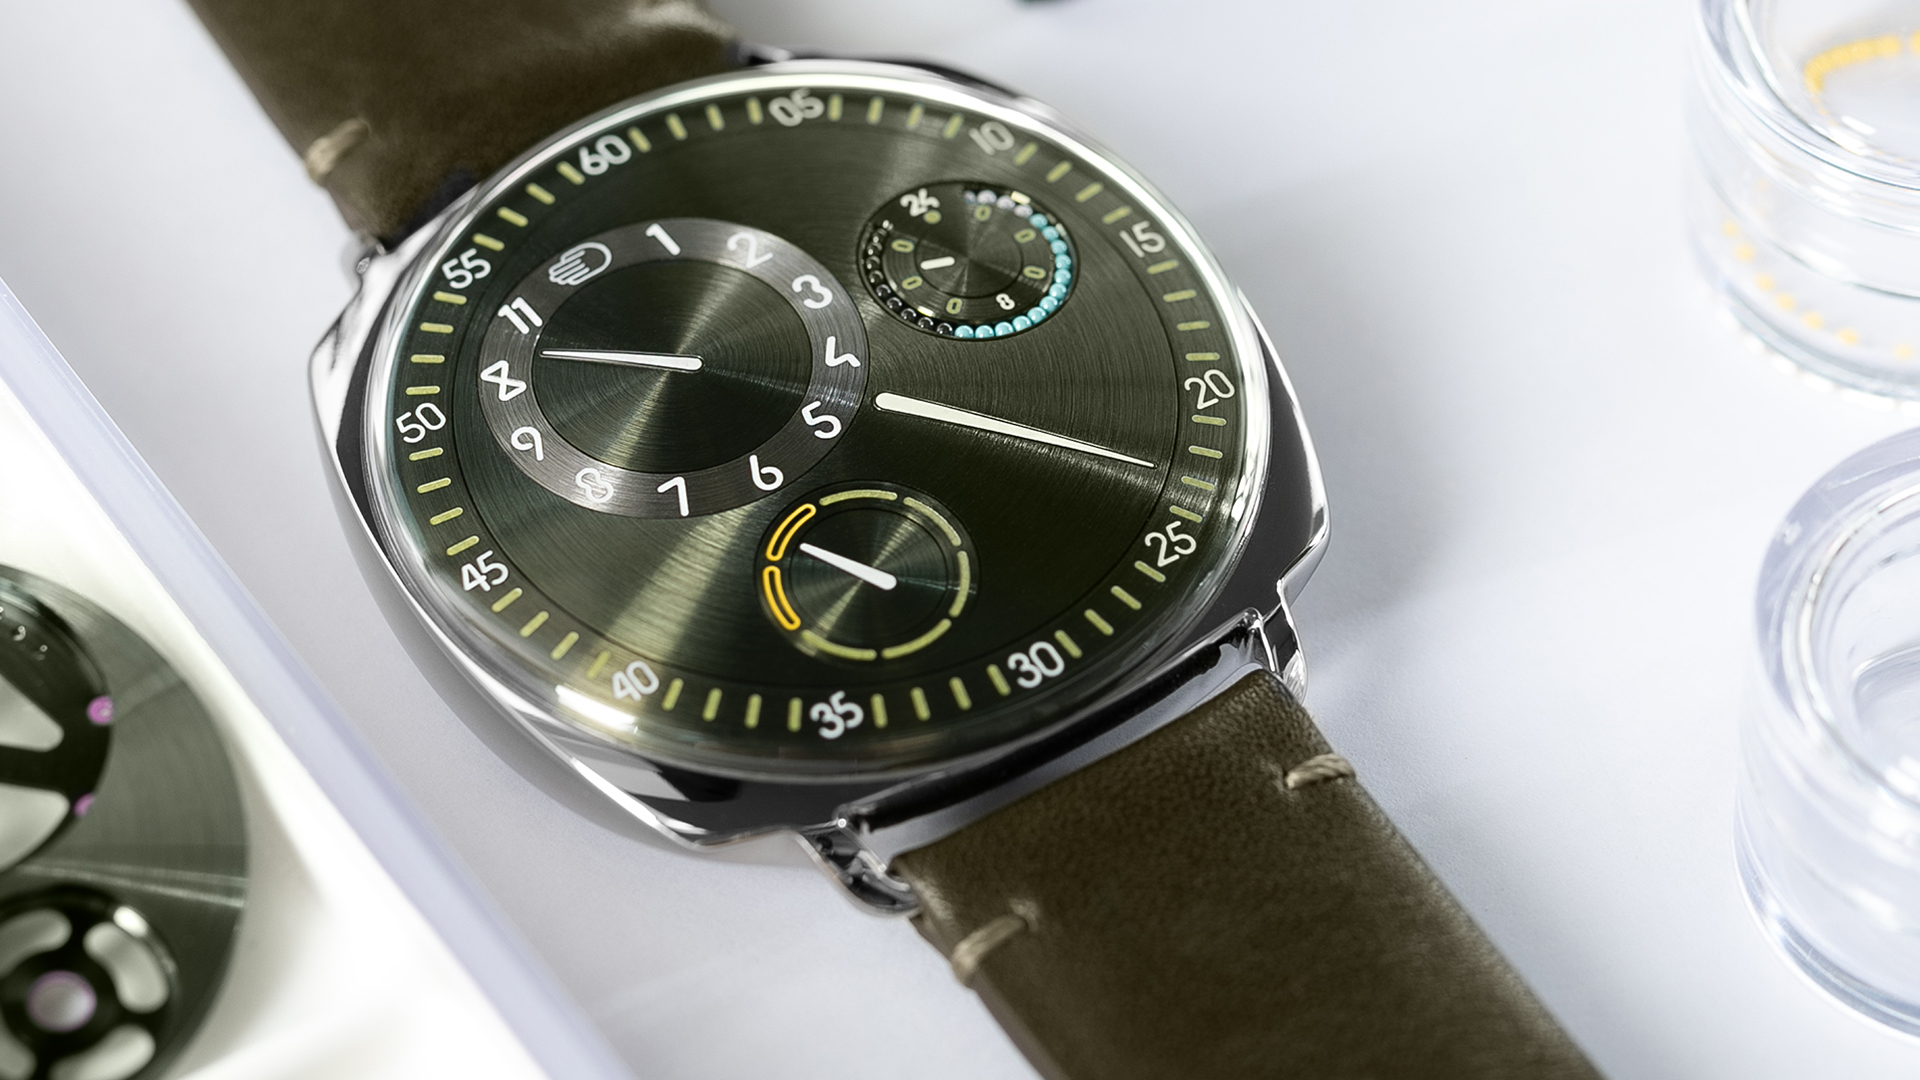 Ressence Debuts Limited Edition Type 1 Squared X Watch